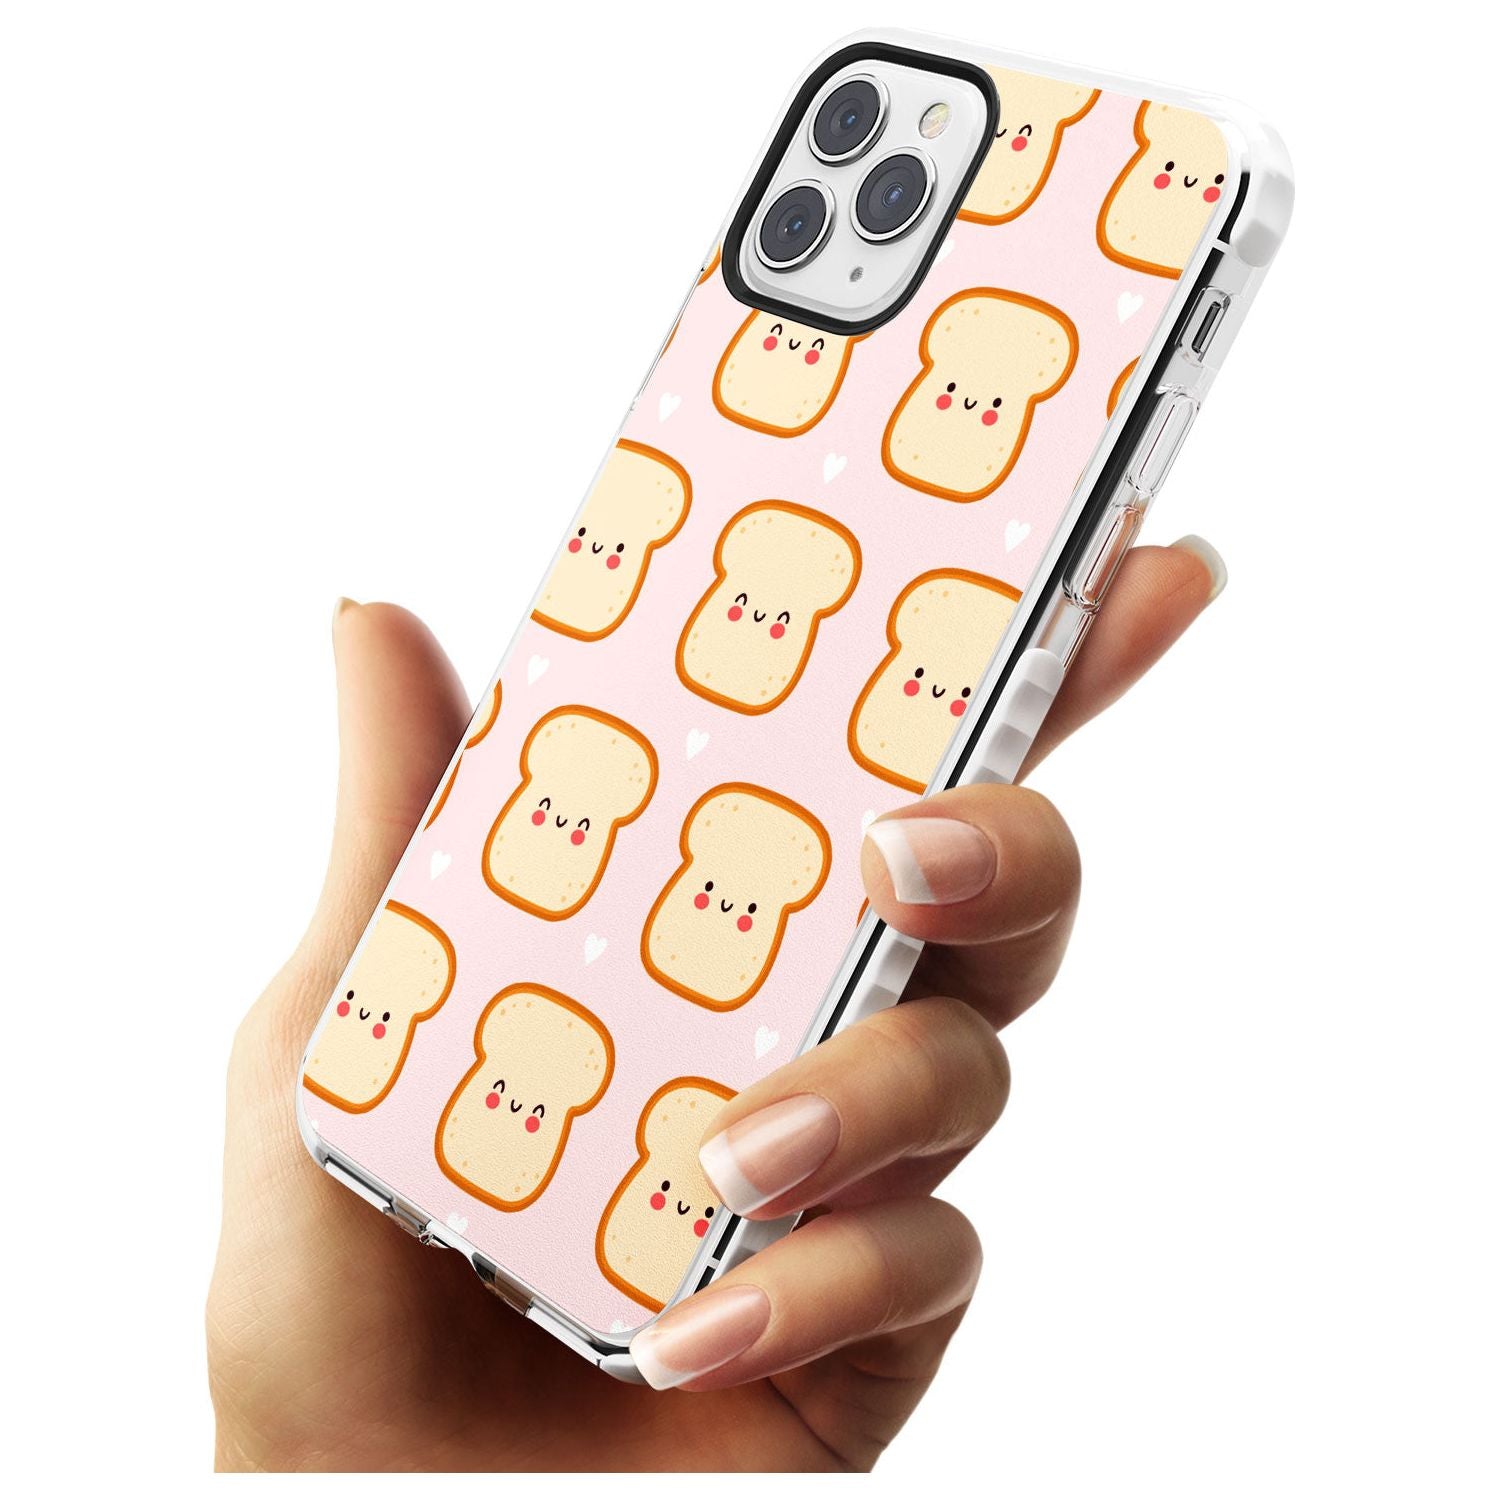 Bread Faces Kawaii Pattern Impact Phone Case for iPhone 11 Pro Max